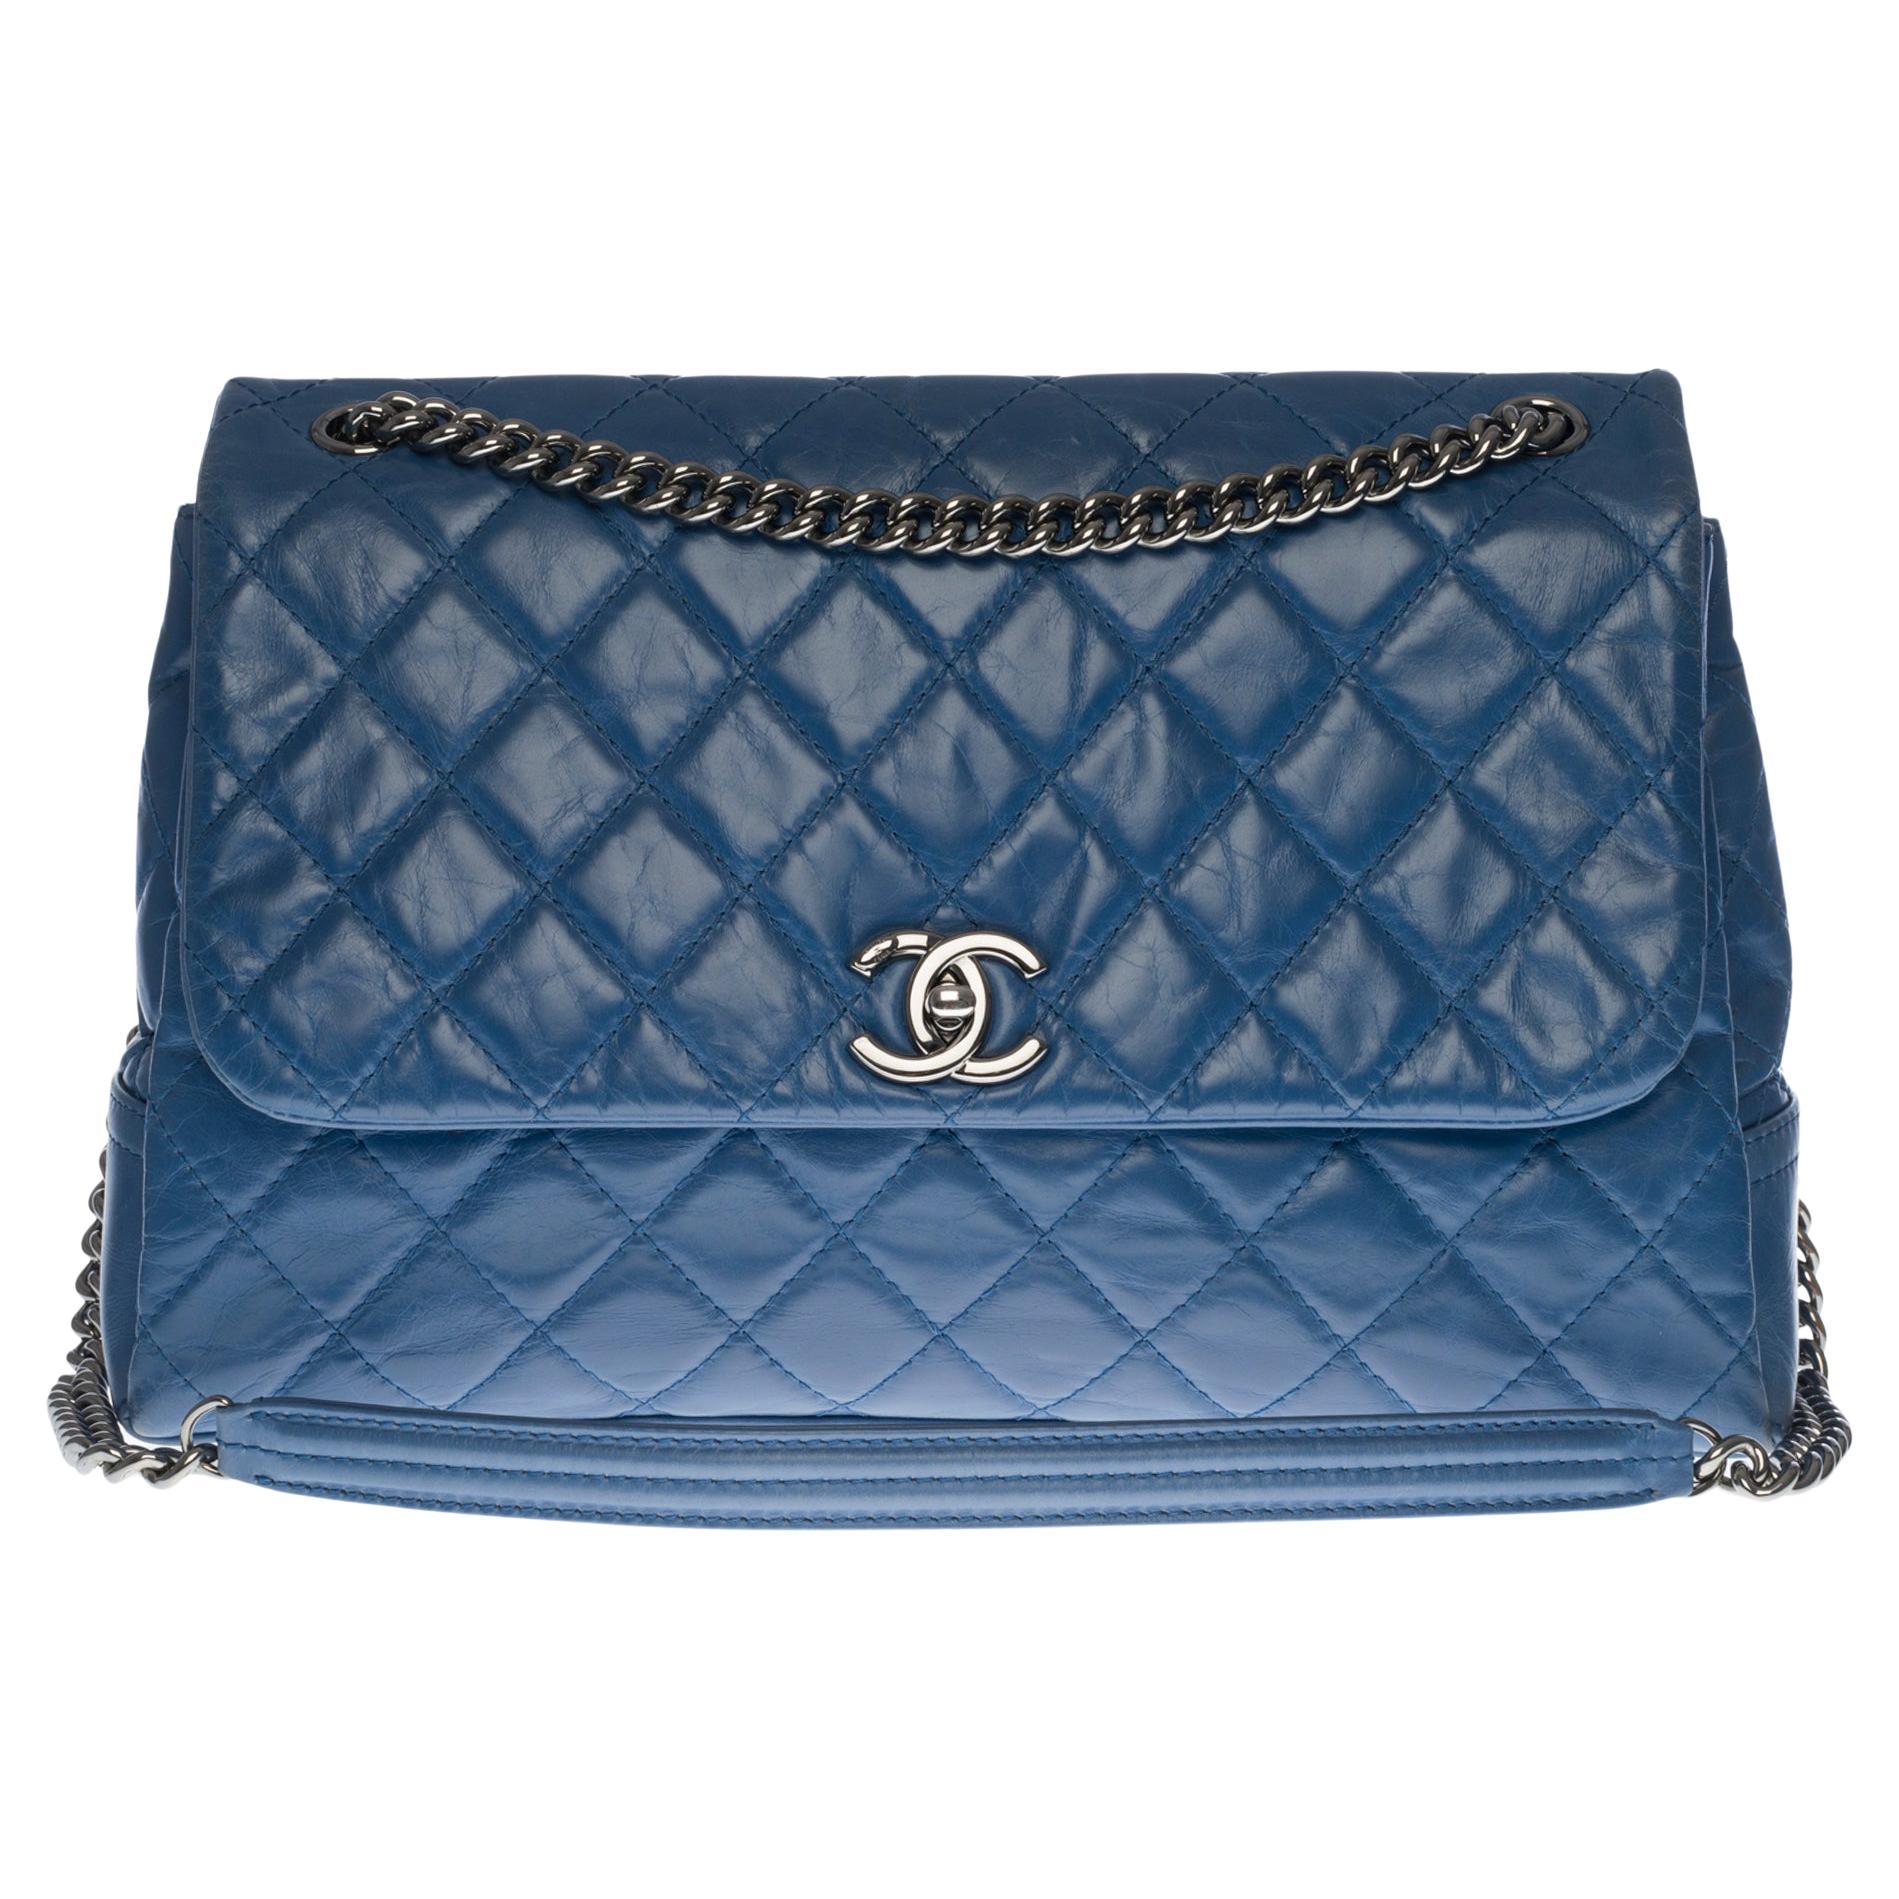 Chanel Classic Maxi Flap shoulder bag in blue quilted lambskin, SHW